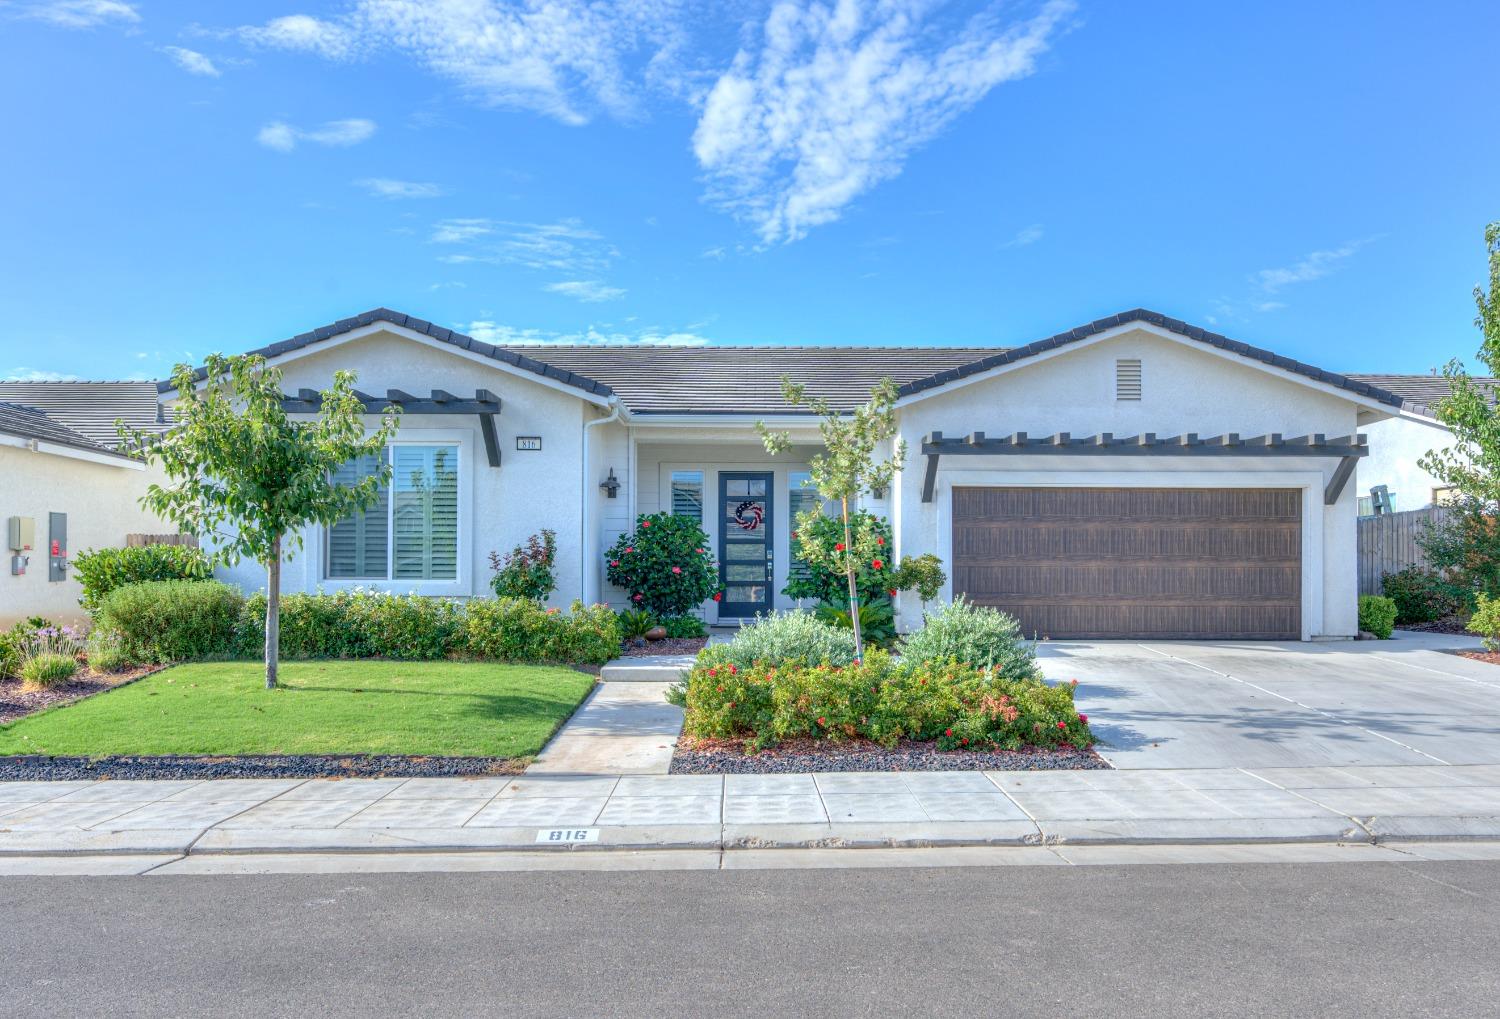 Photo of 816 Spring St in Madera, CA